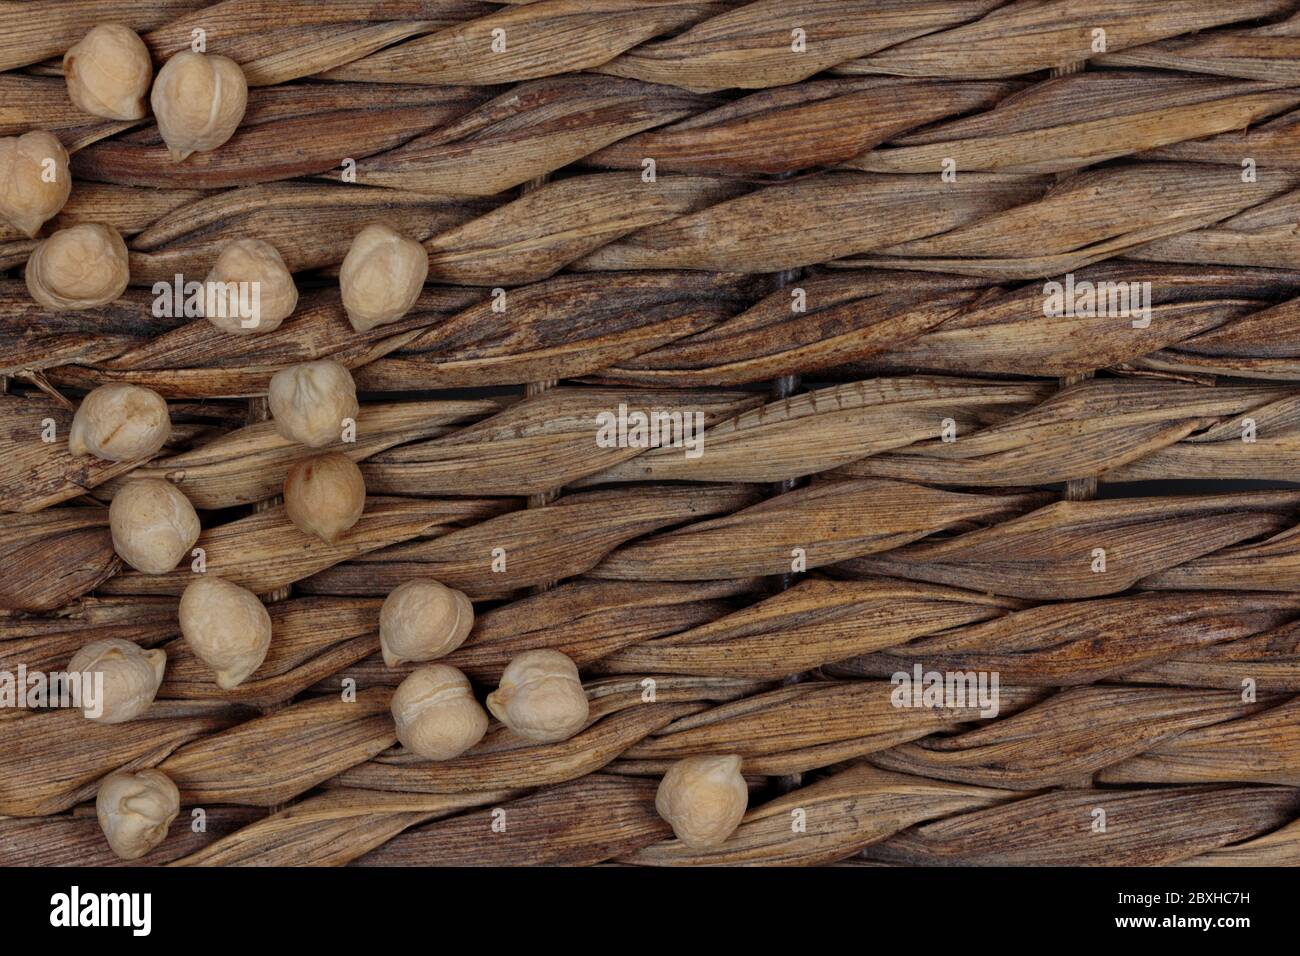 scattered, dry garbanzo beans or chick peas on a brown, wicker background with copy space Stock Photo